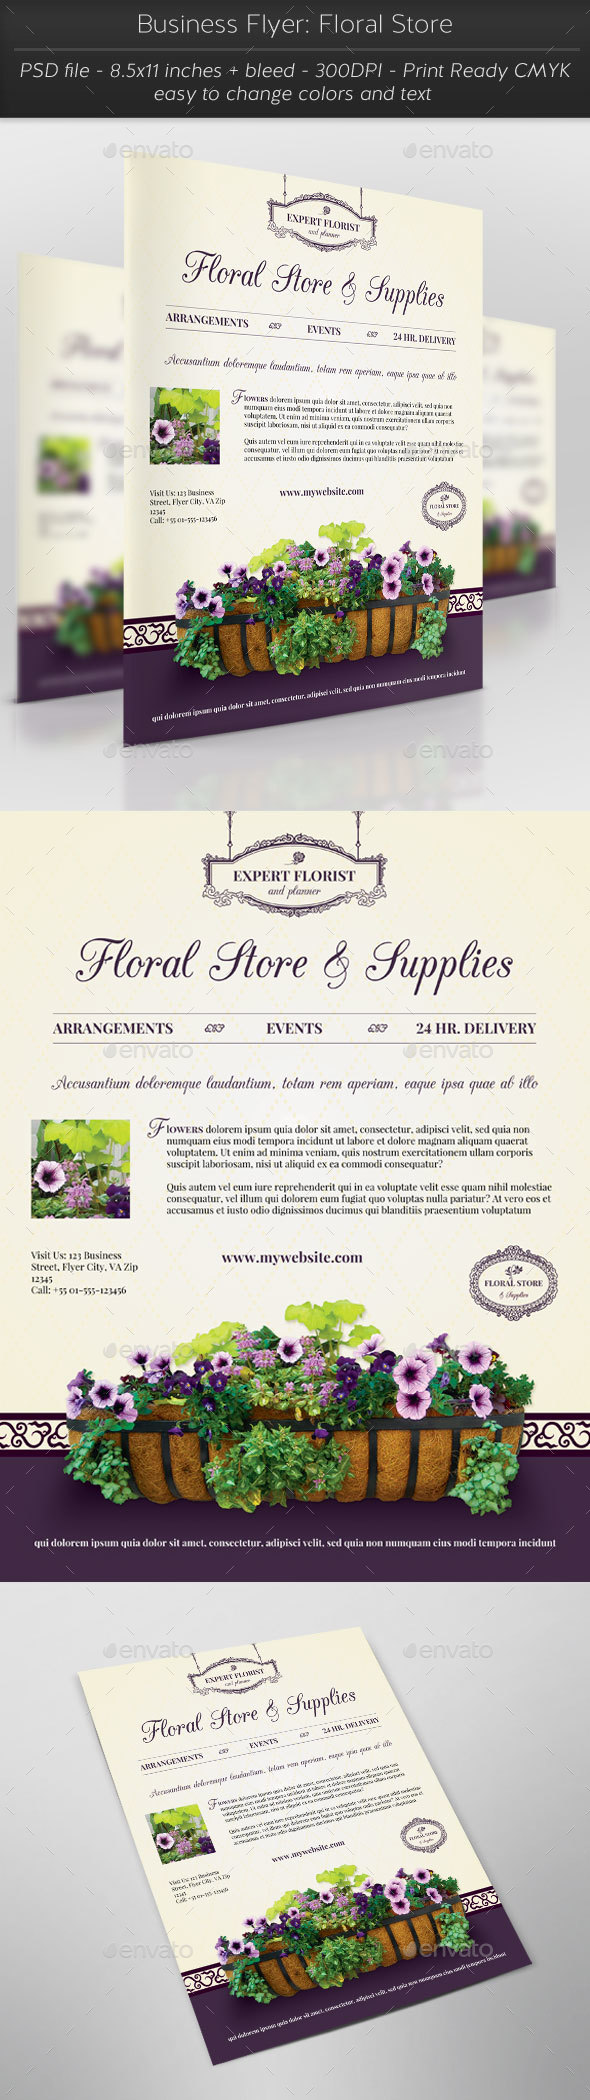 Business Flyer: Floral Store